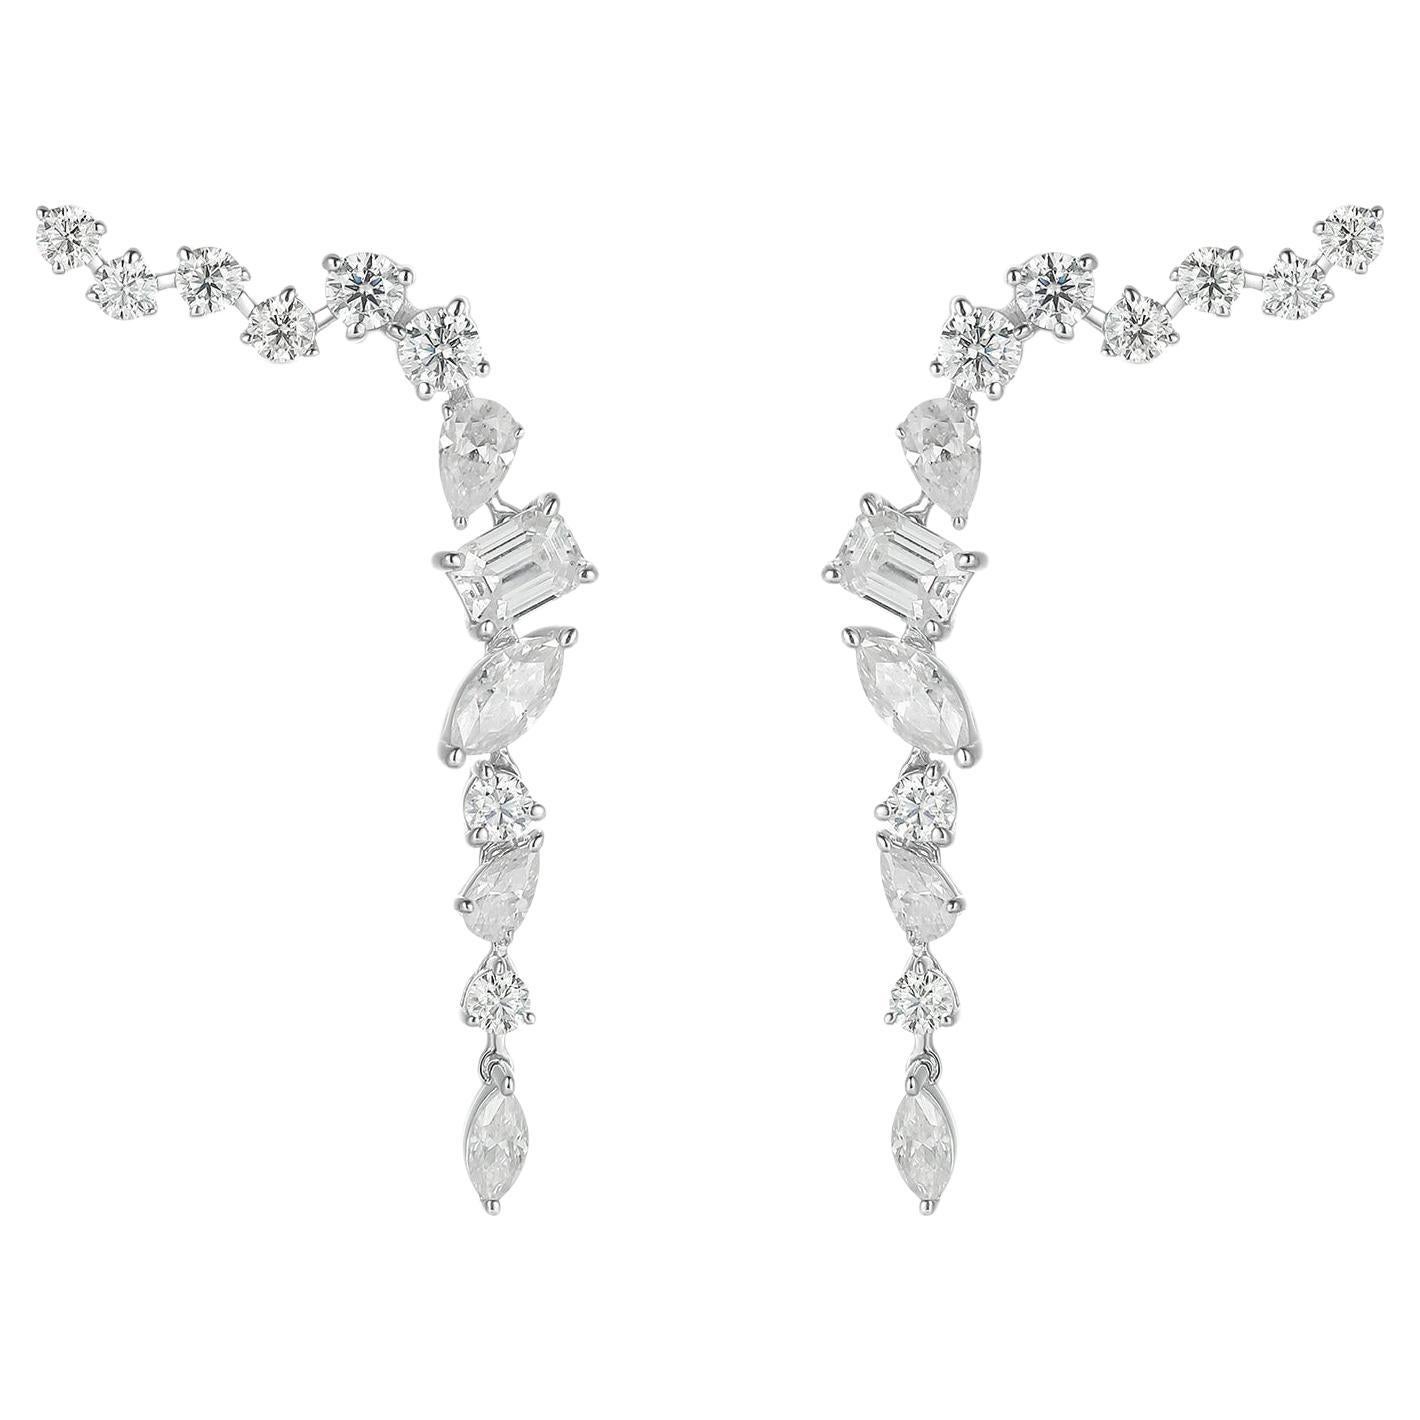 AdornA's genre-redefining designs mix easy luxury, mood-boosting bursts of color, timeless craftsmanship, and expressive, unexpected forms.

Earring Information
Diamond Type : Natural Diamond
Metal : 18k Gold
Metal Color : White Gold
Total Carat